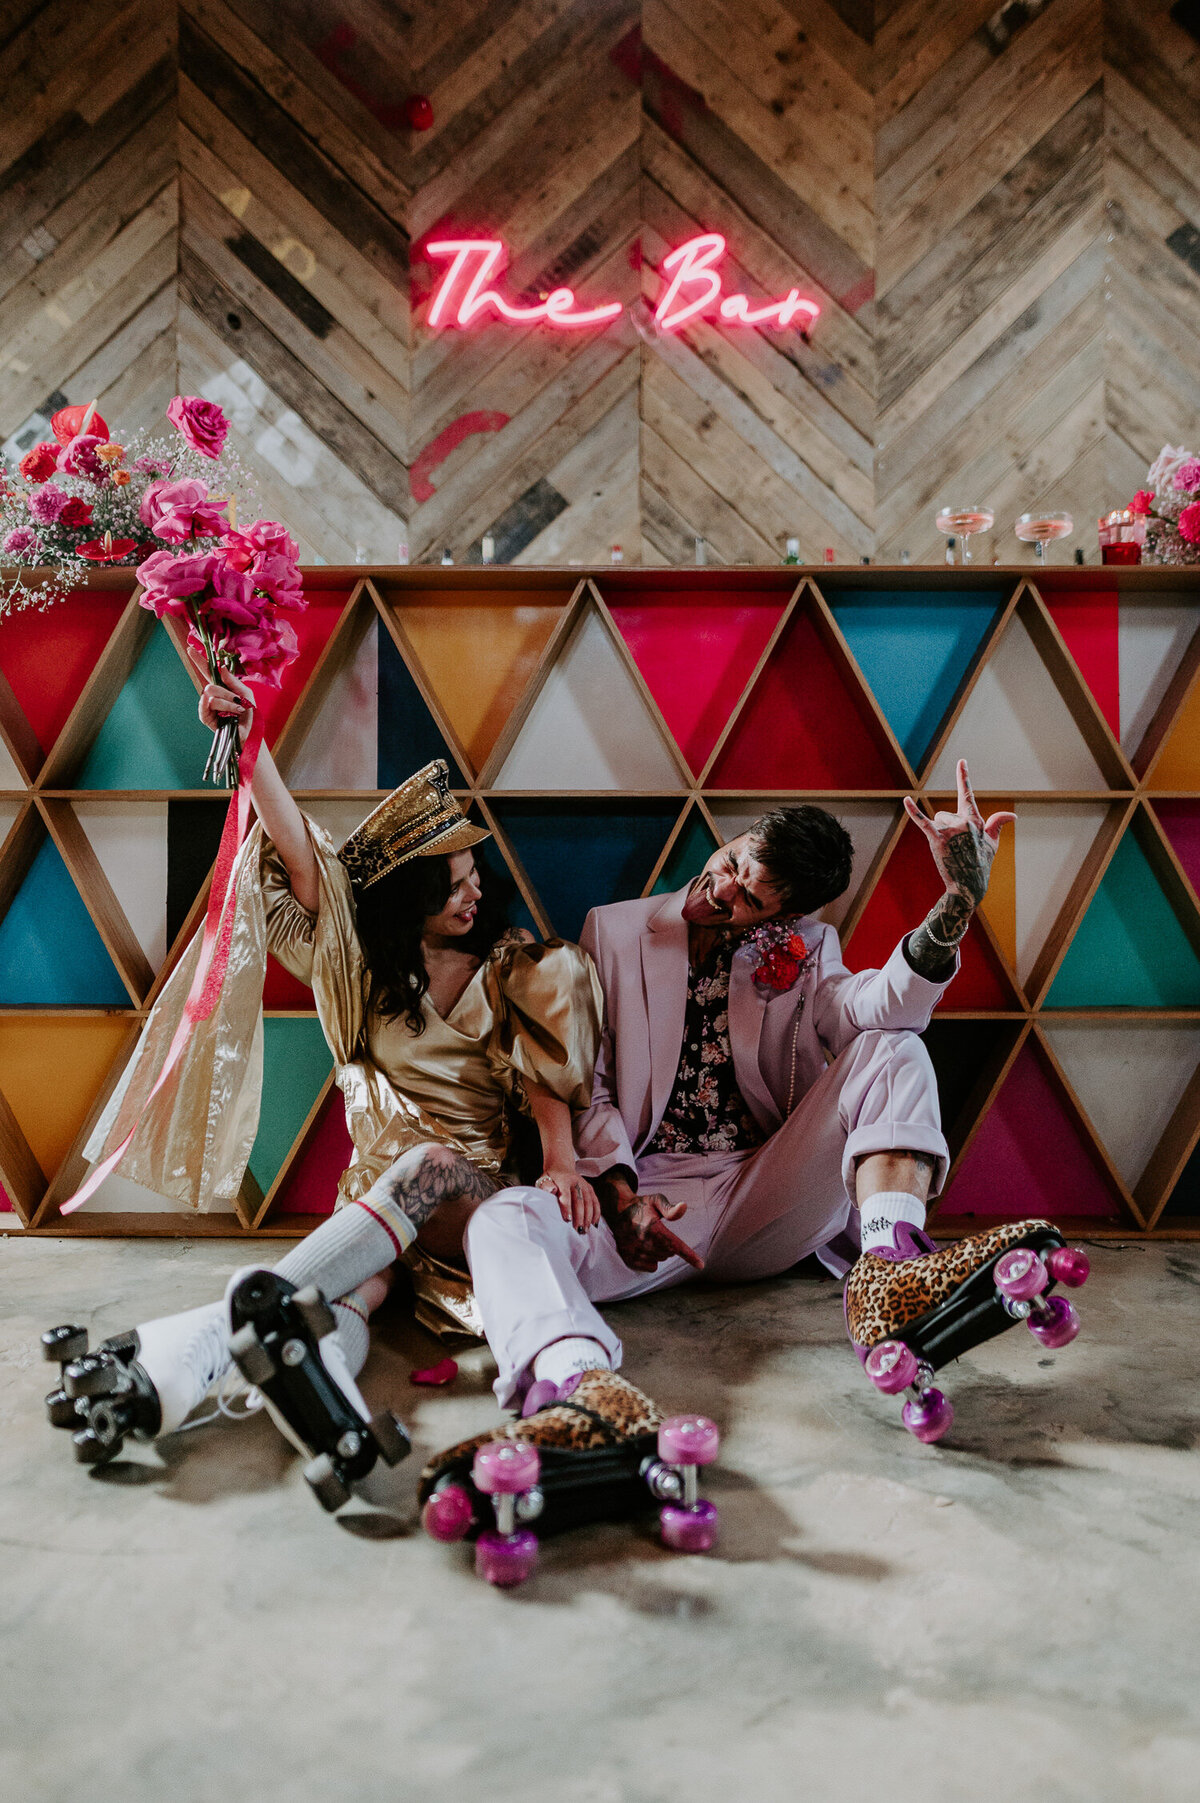 A couple wearing roller skates at their wedding at The Canary Shed. The groom is wearing a lilac suit and the bride is wearing a golden dress, they are both heavily tattooed and alternative. The bride is holding up a pink wedding bouquet which matches the colour of their wedding.